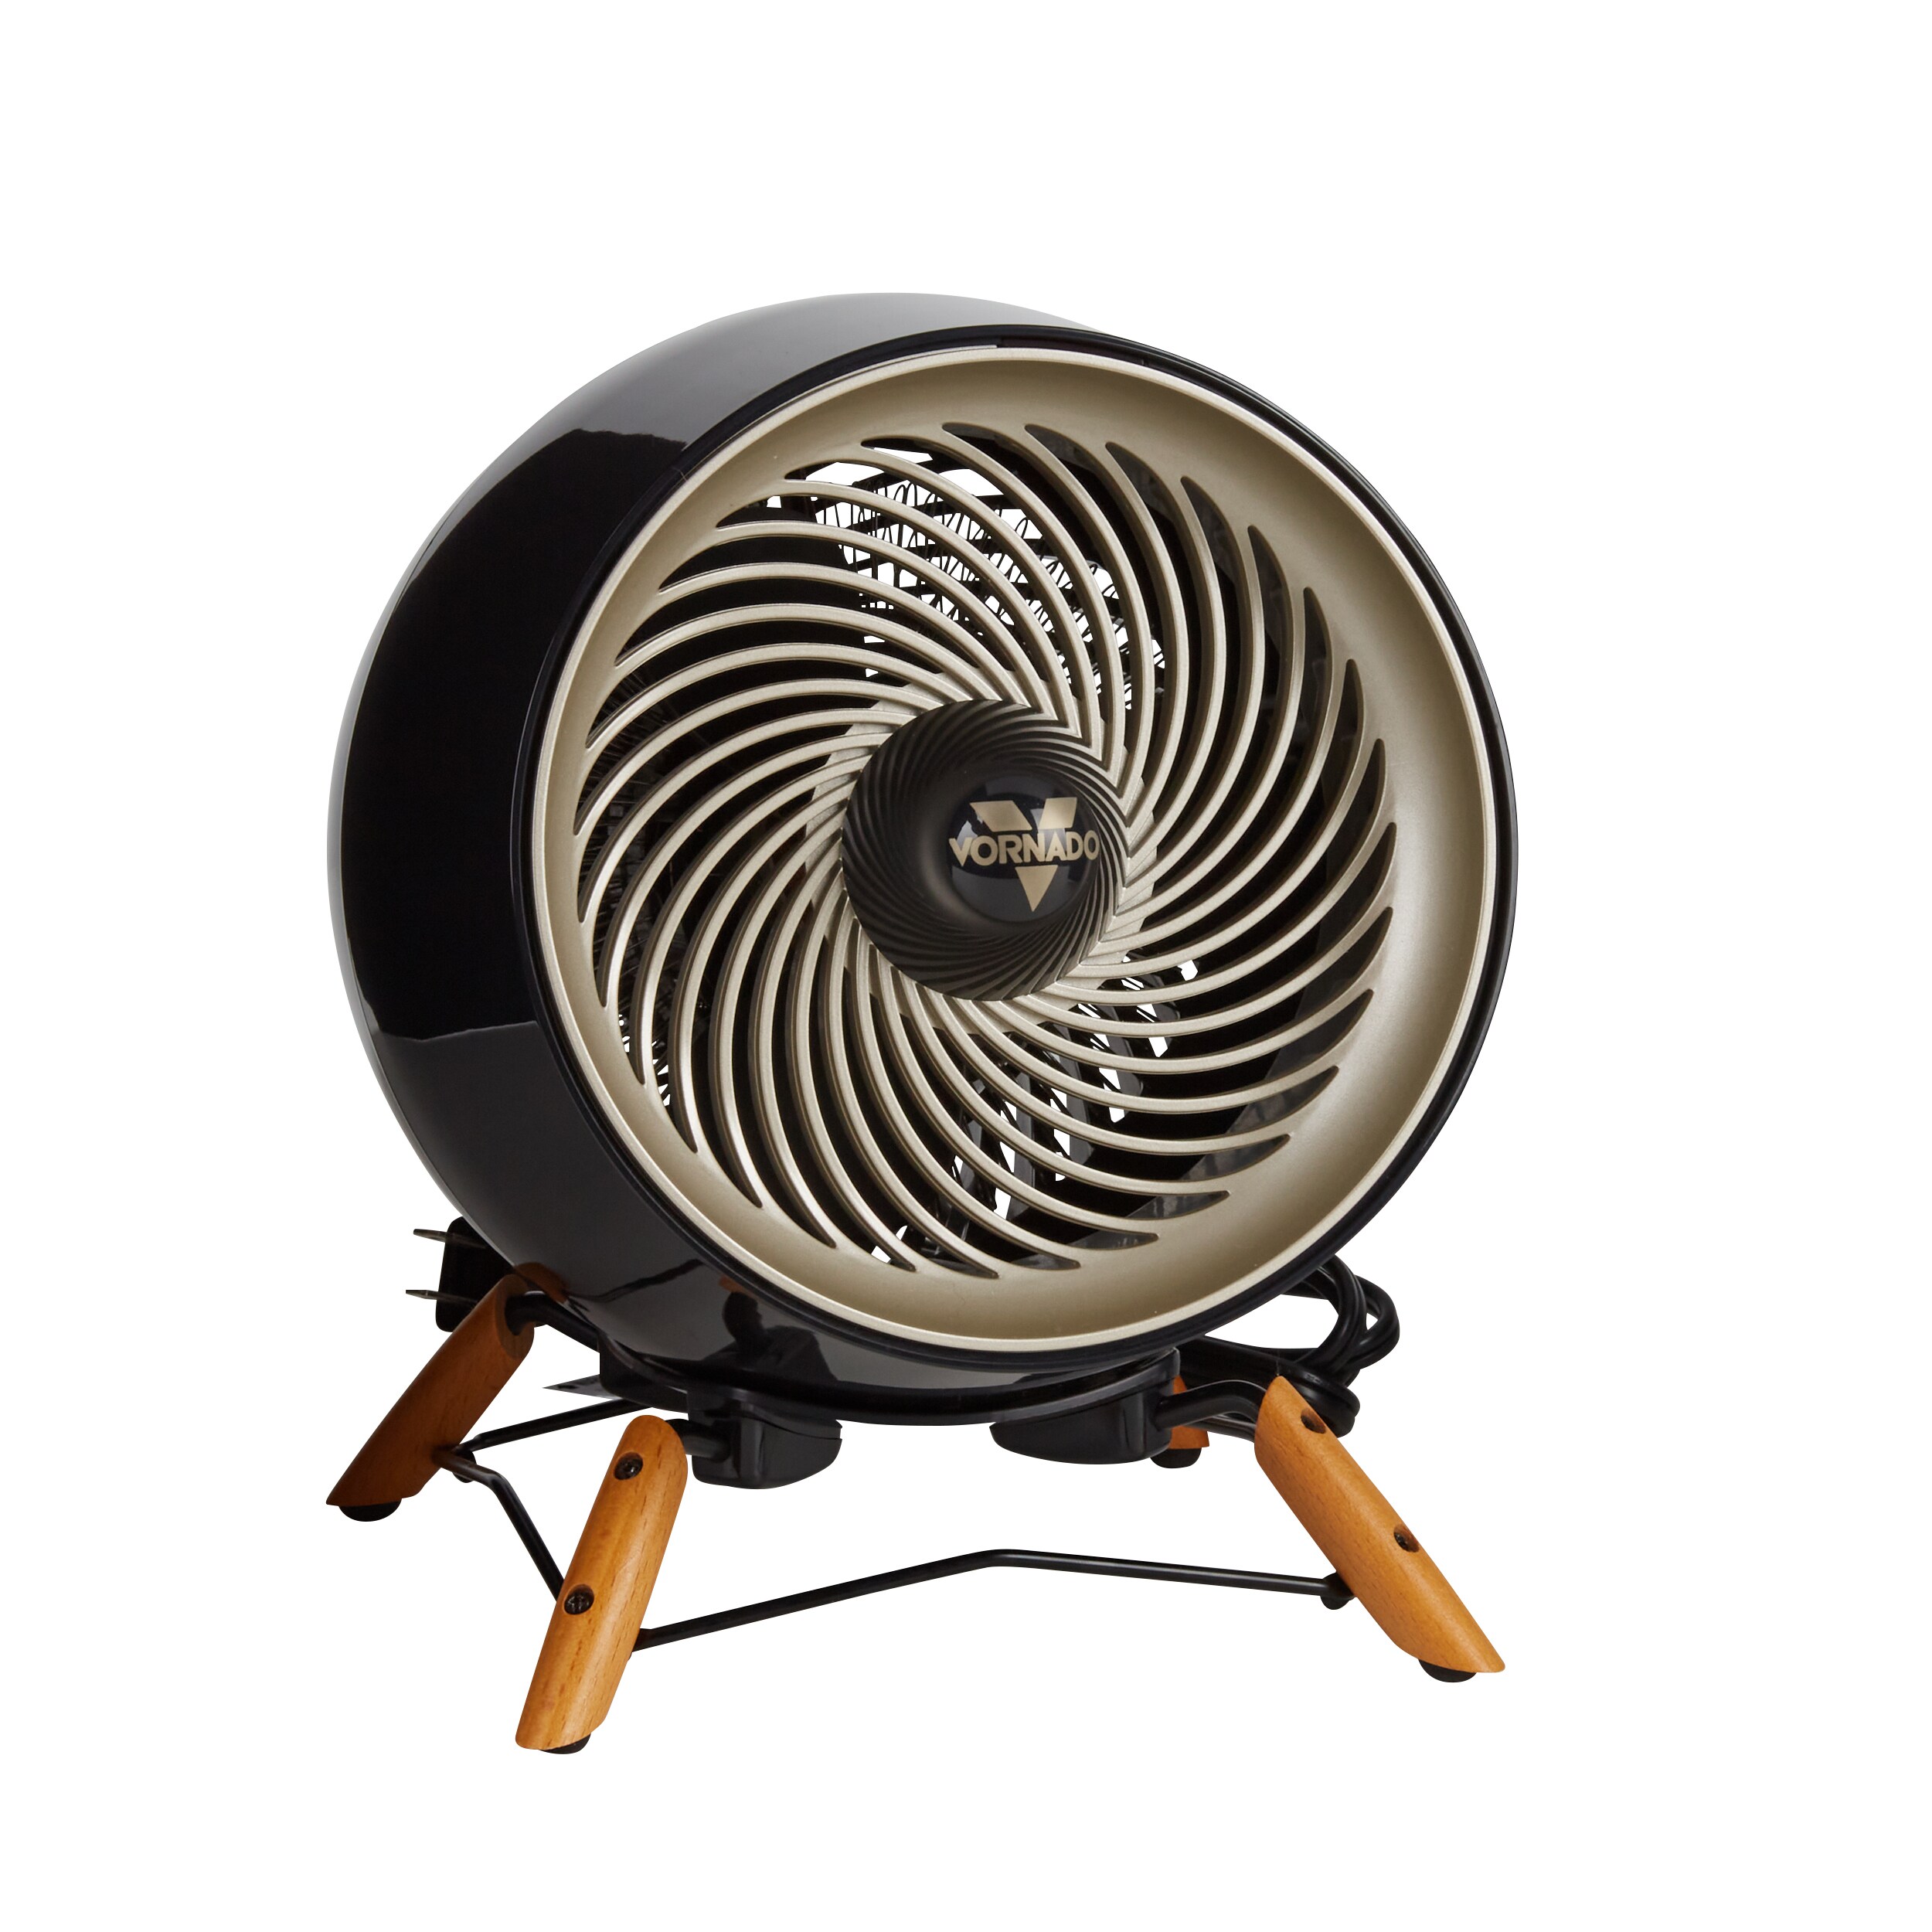 Vornado 1500-Watt Fan Compact Personal Indoor Electric Space Heater with Thermostat